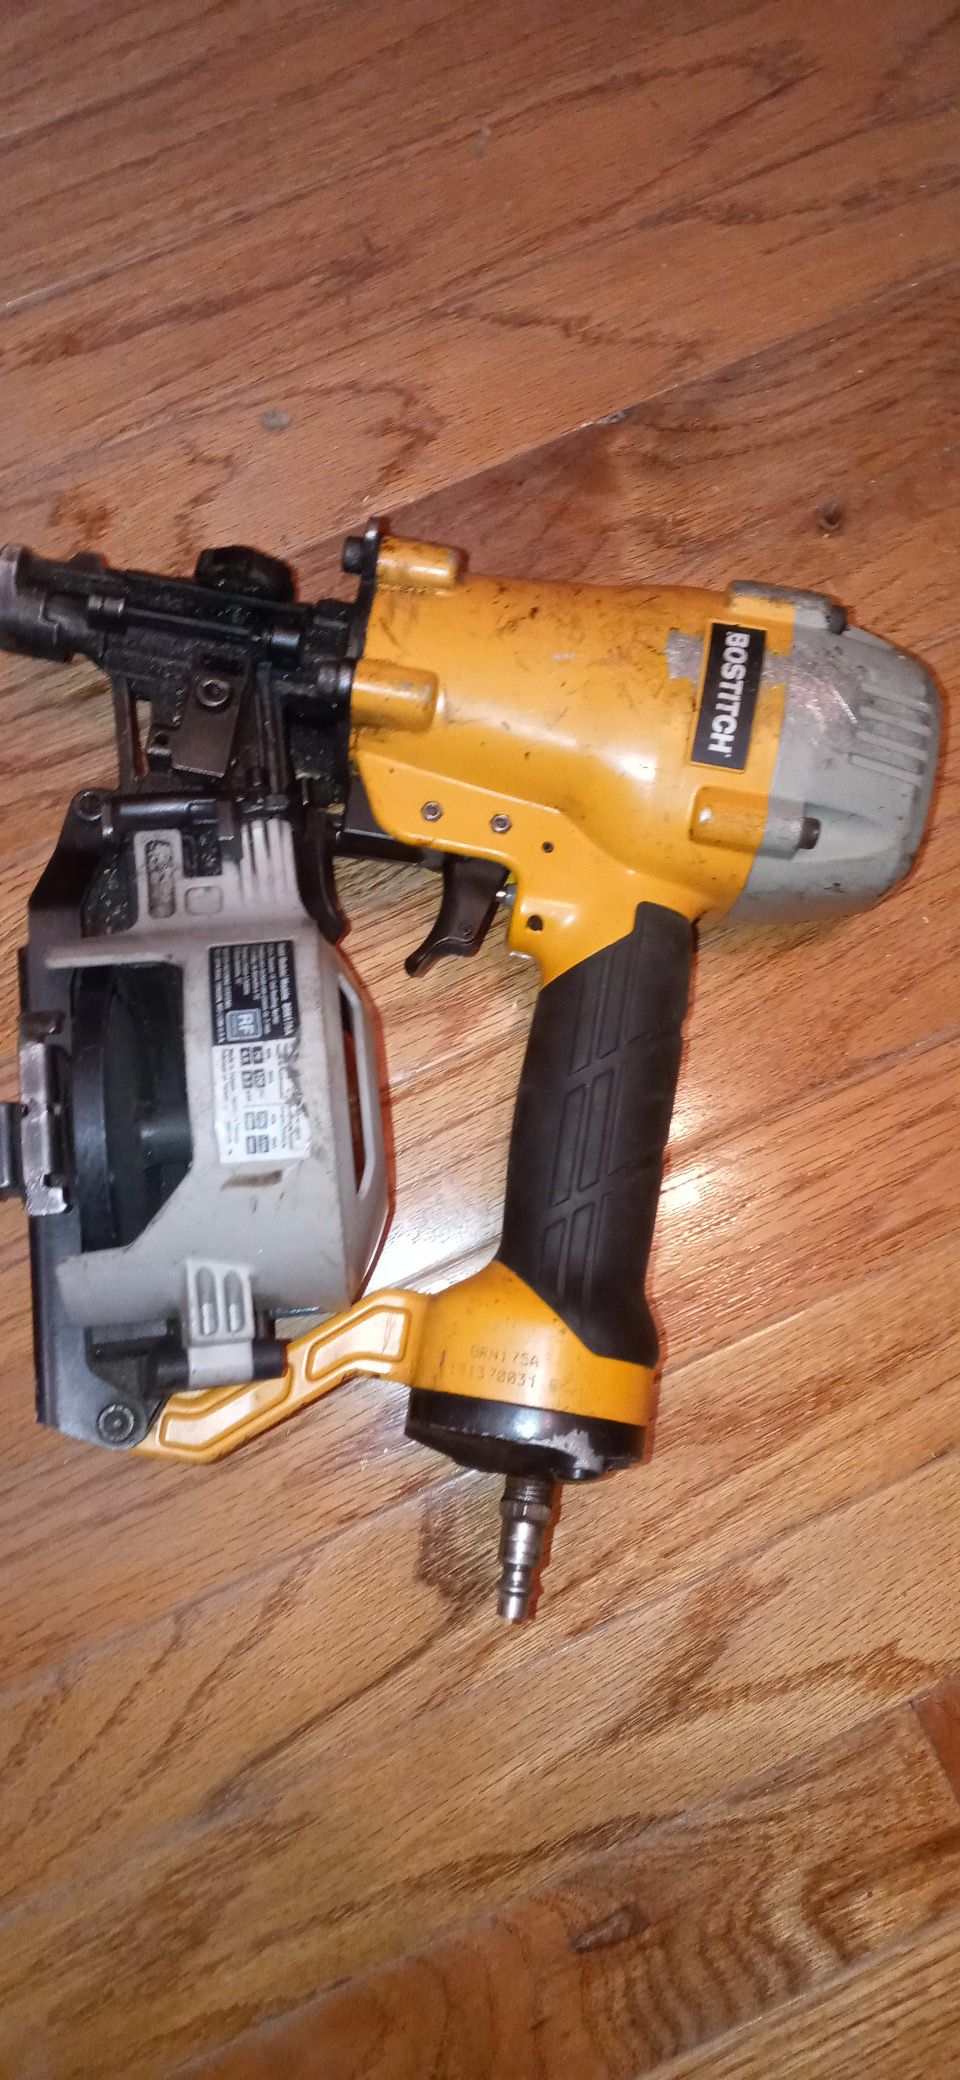 Bostitch nail gun in good conditions